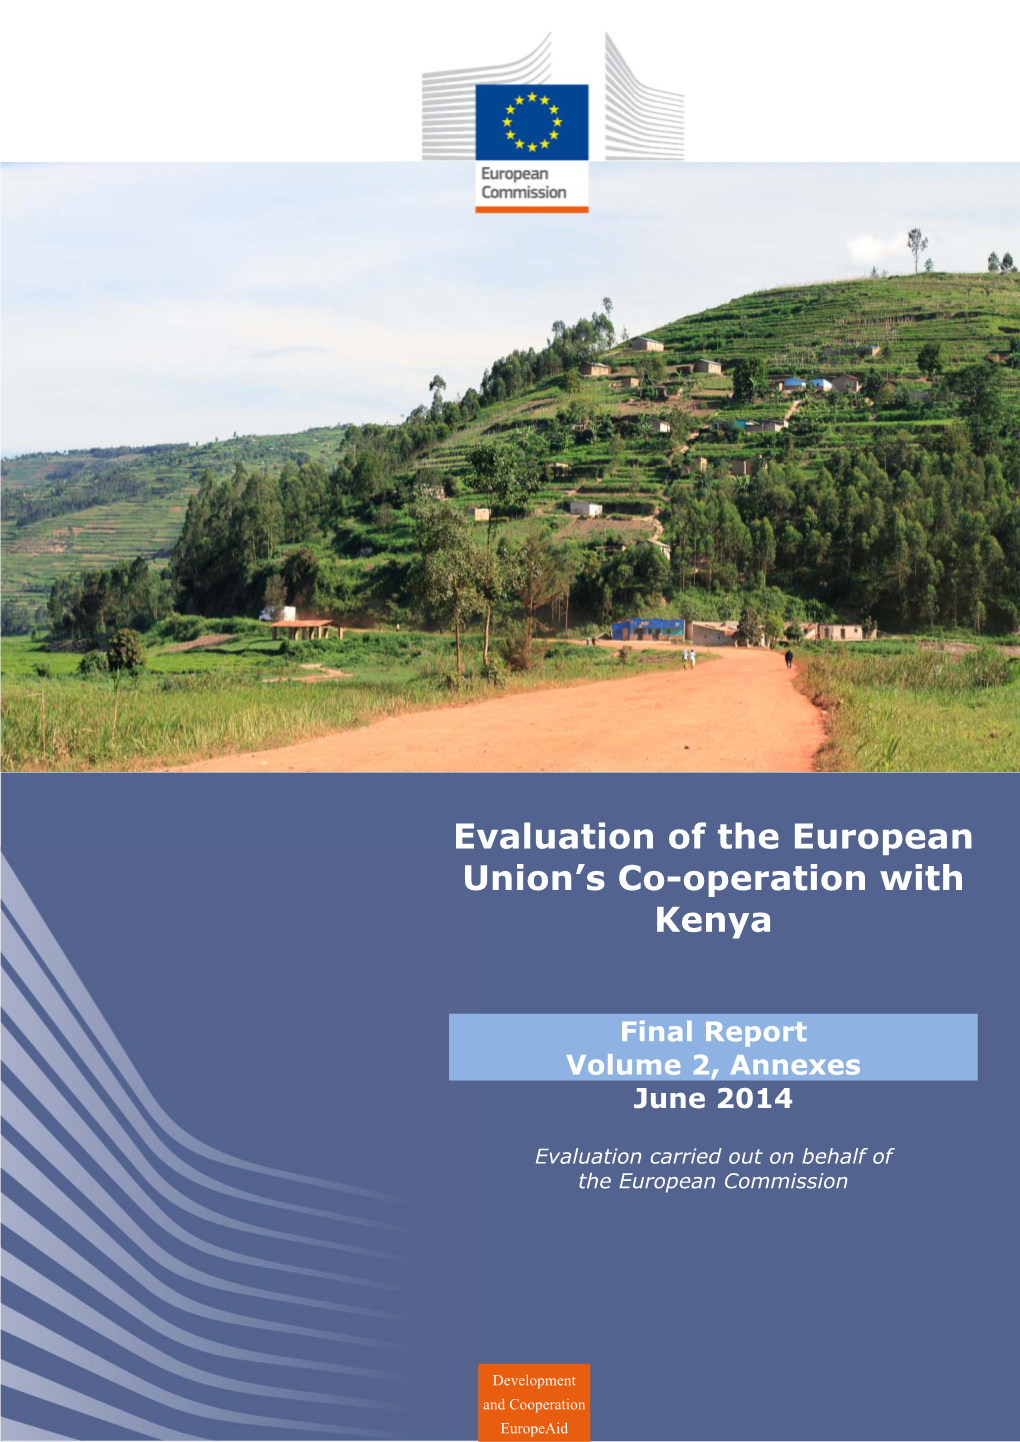 Evaluation of the European Union's Co-Operation with Kenya